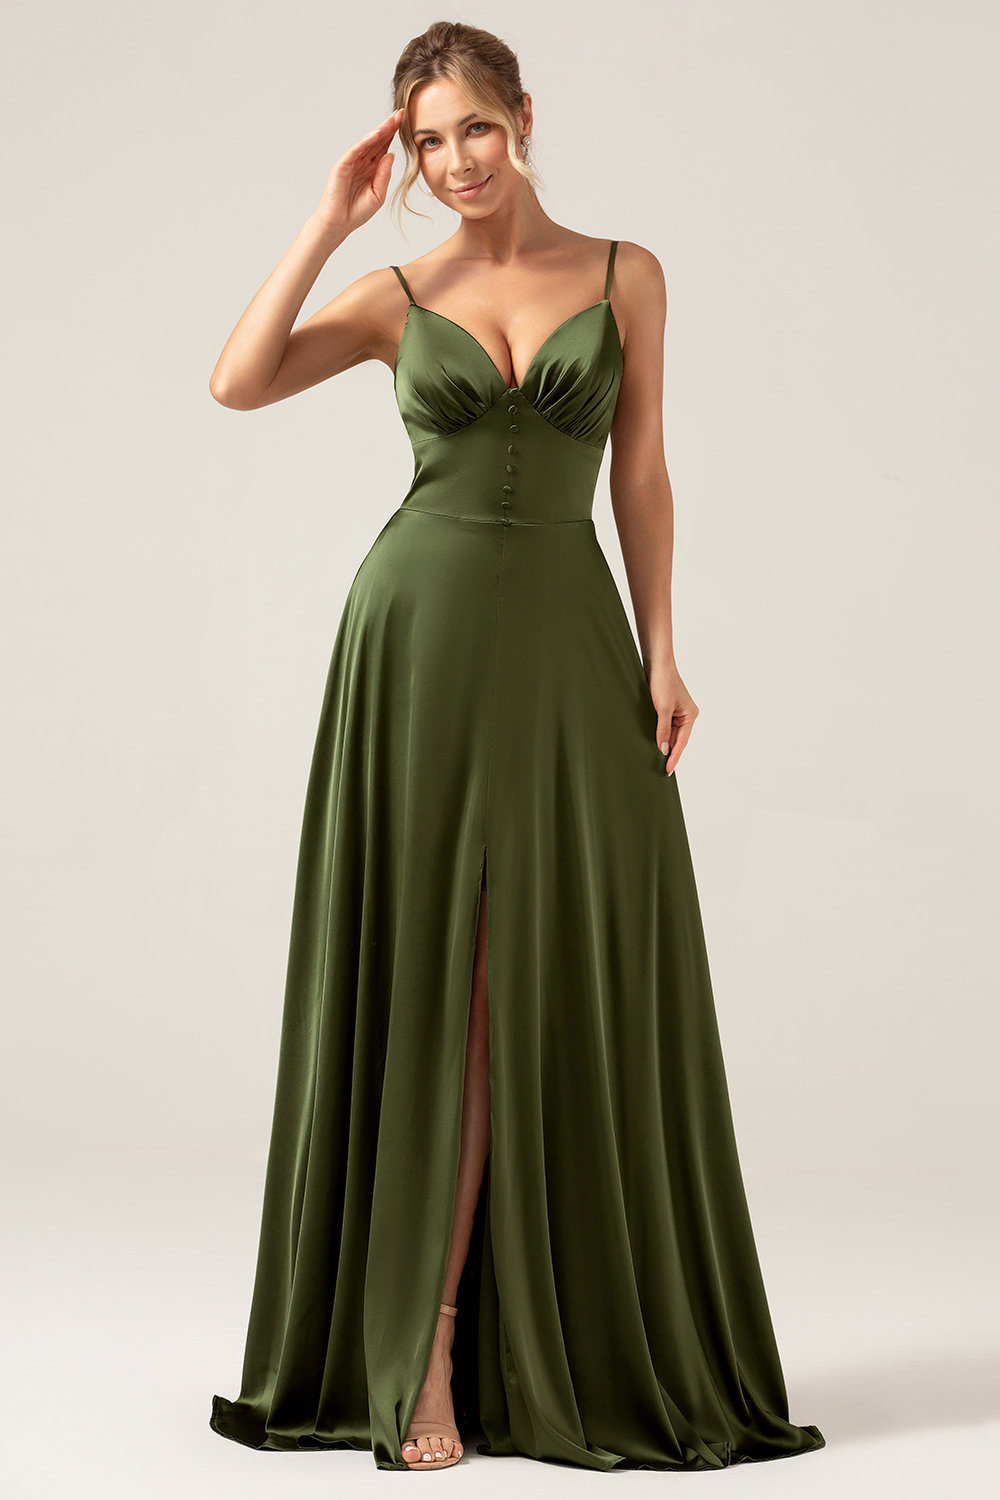 Leely Women Olive A Line Satin Bridesmaid Dress Spaghetti Straps Long Wedding Guest Dress with Slit